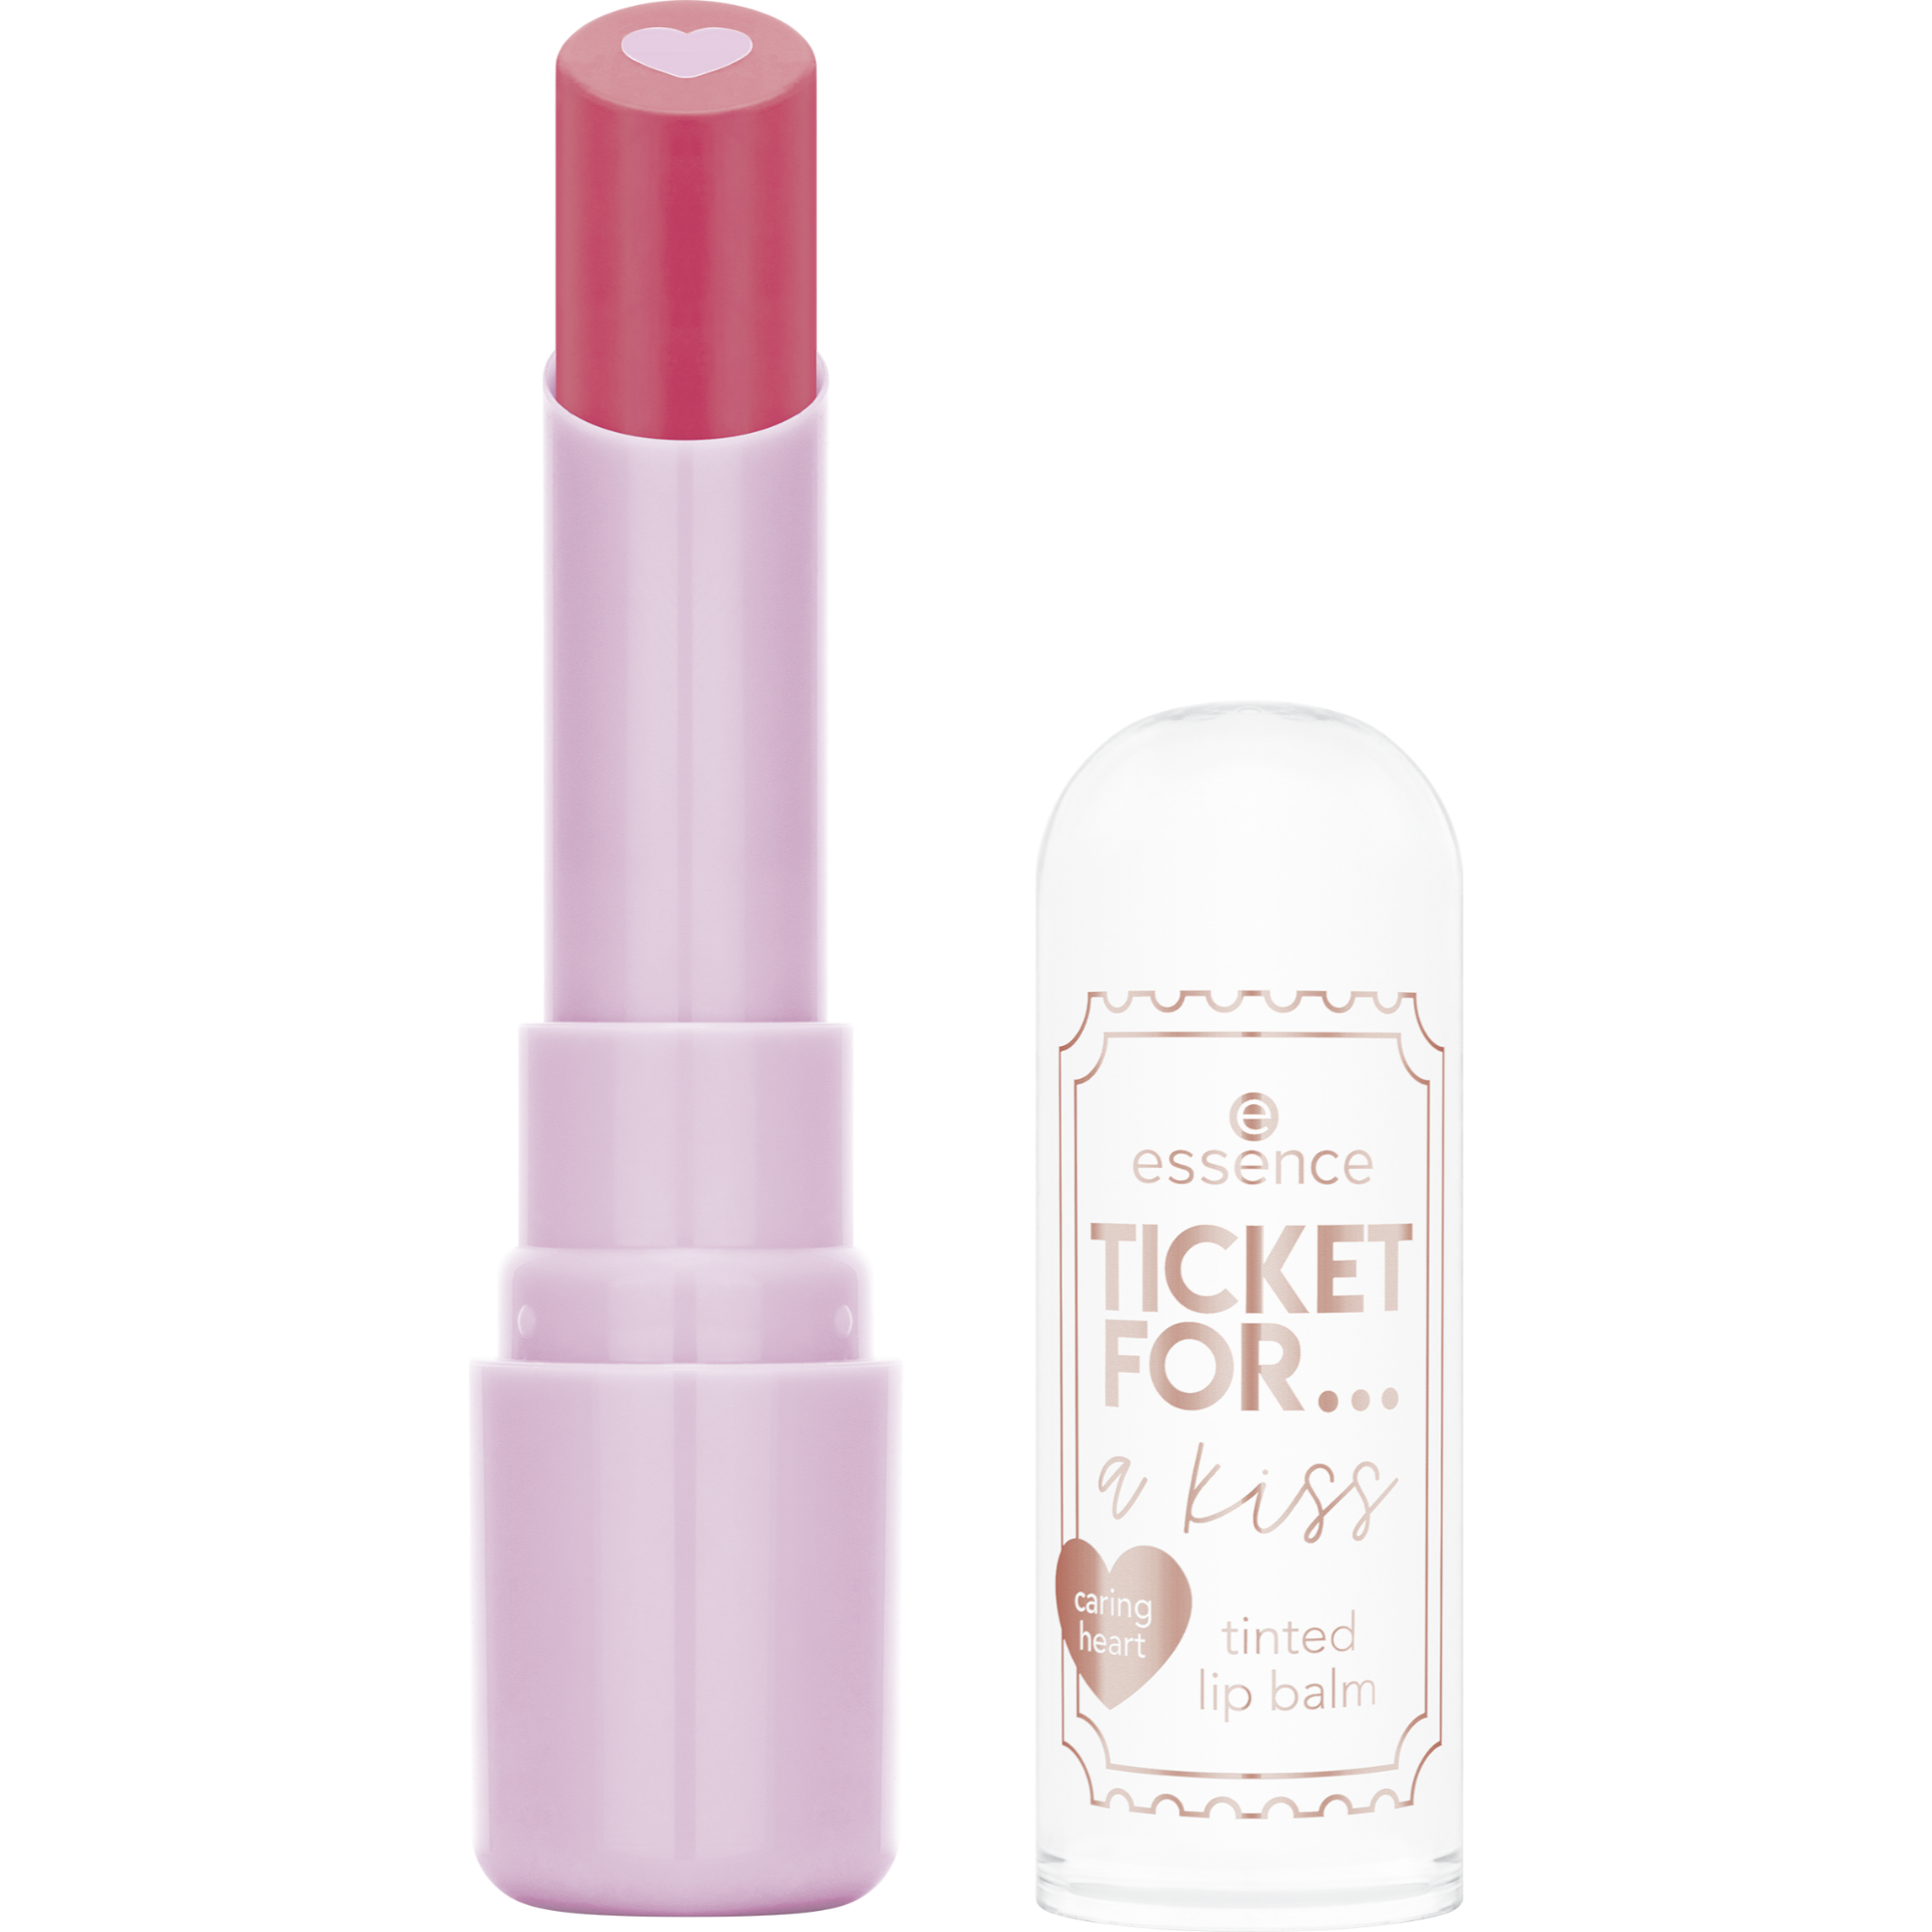 TICKET FOR... a kiss tinted lip balm